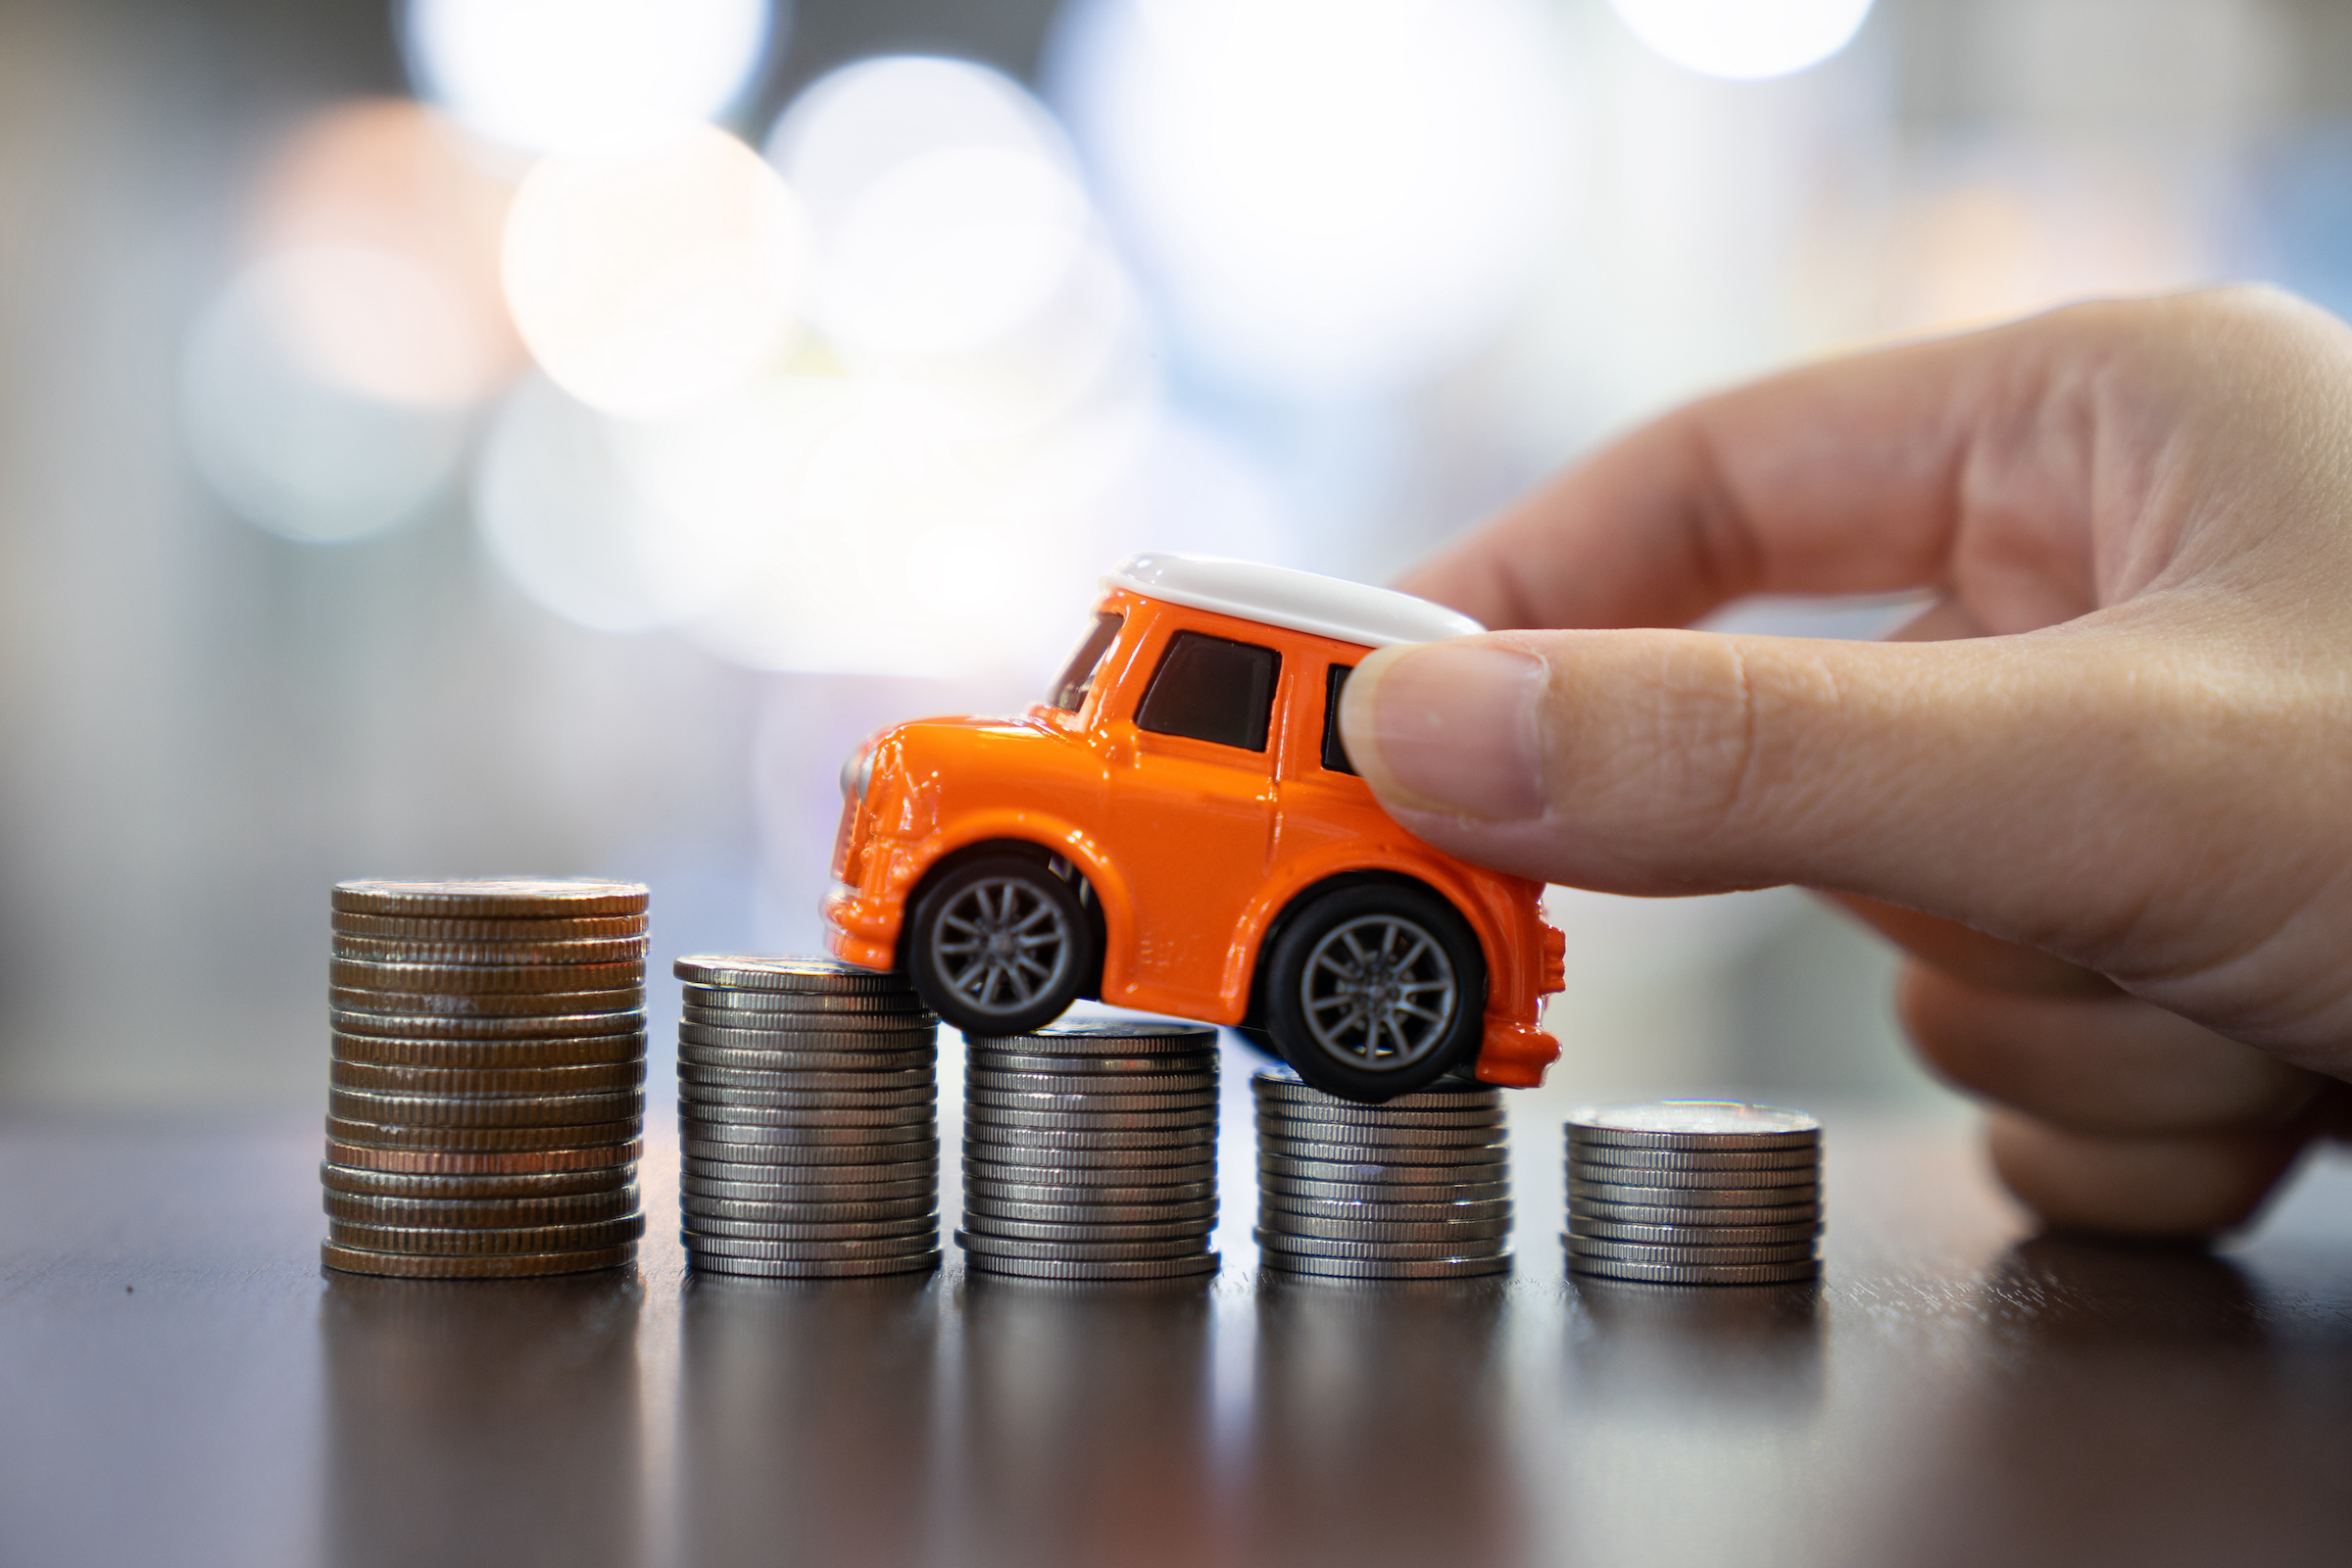 Pay as you go: Financing a classic car purchase